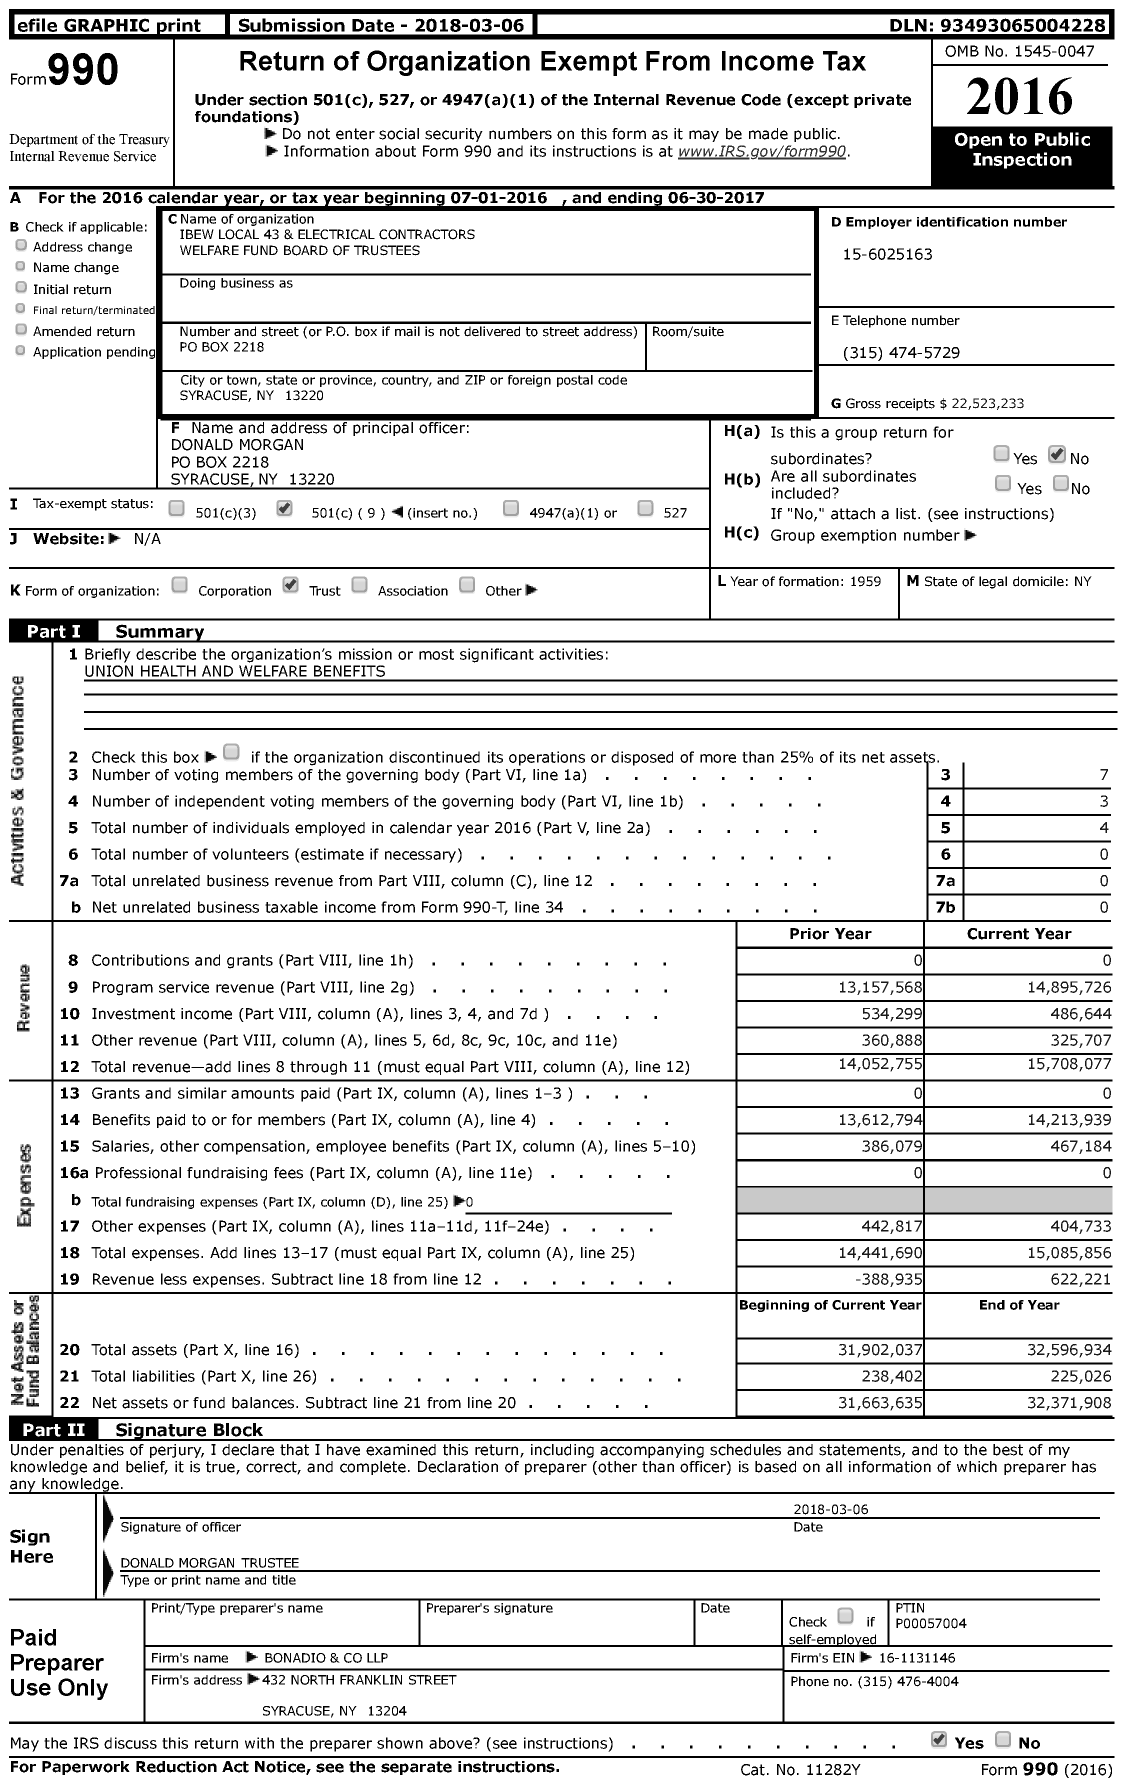 Image of first page of 2016 Form 990 for IBEW Local 43 and Electrical Contractors Welfare Fund Board of Trustees